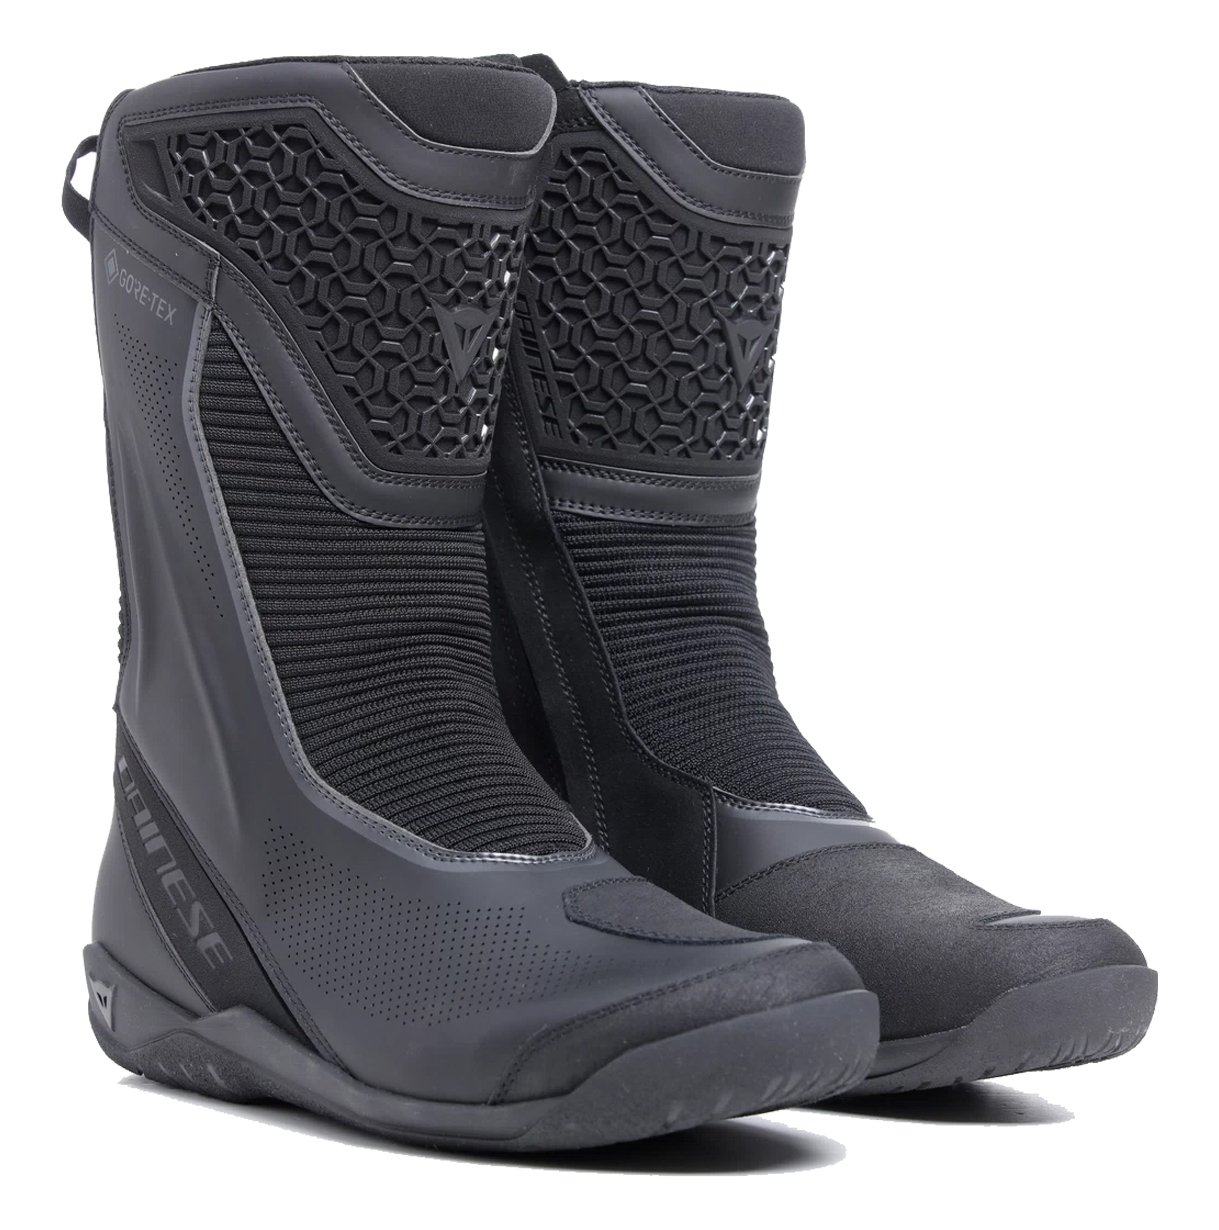 Image of Dainese Freeland 2 Gore-Tex Boots Black Size 49 ID 8051019692689